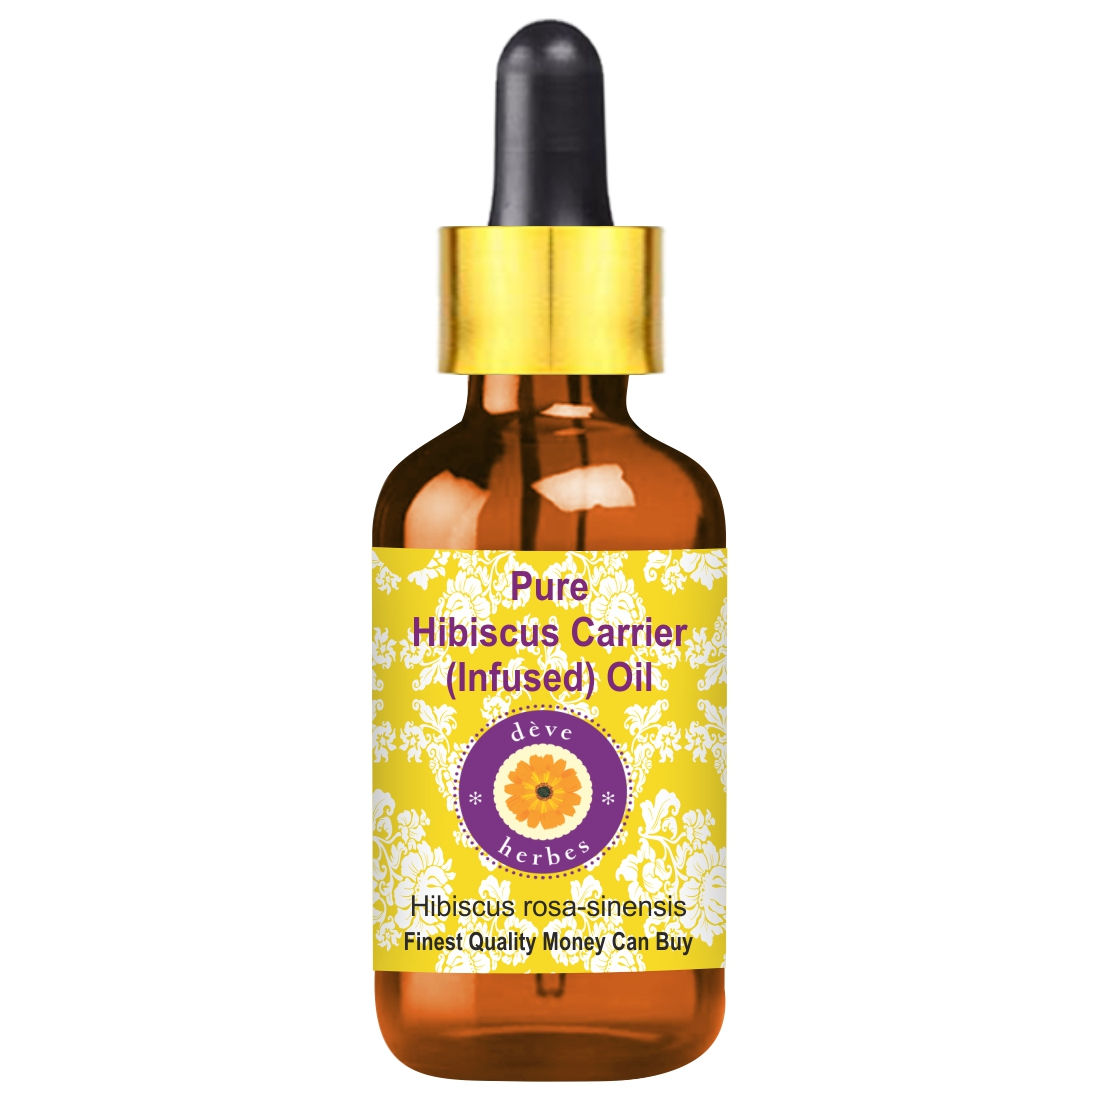 Deve Herbes Pure Hibiscus Carrier (Infused) Oil (Hibiscus Rosa-Sinensis) For Skin & Hair Health